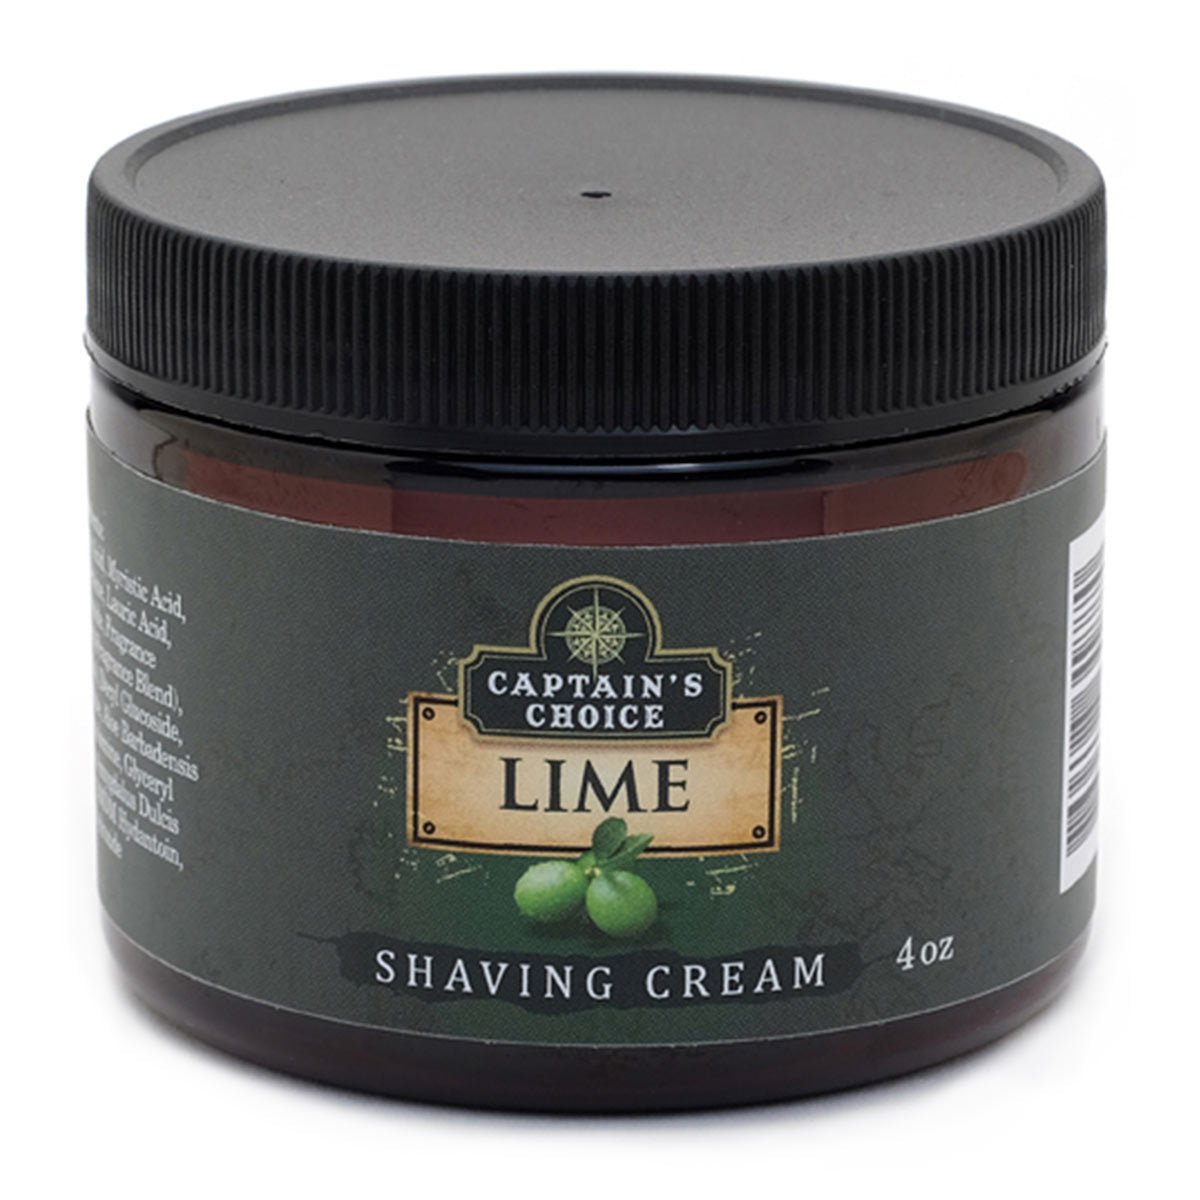 Primary image of Lime Shave Cream